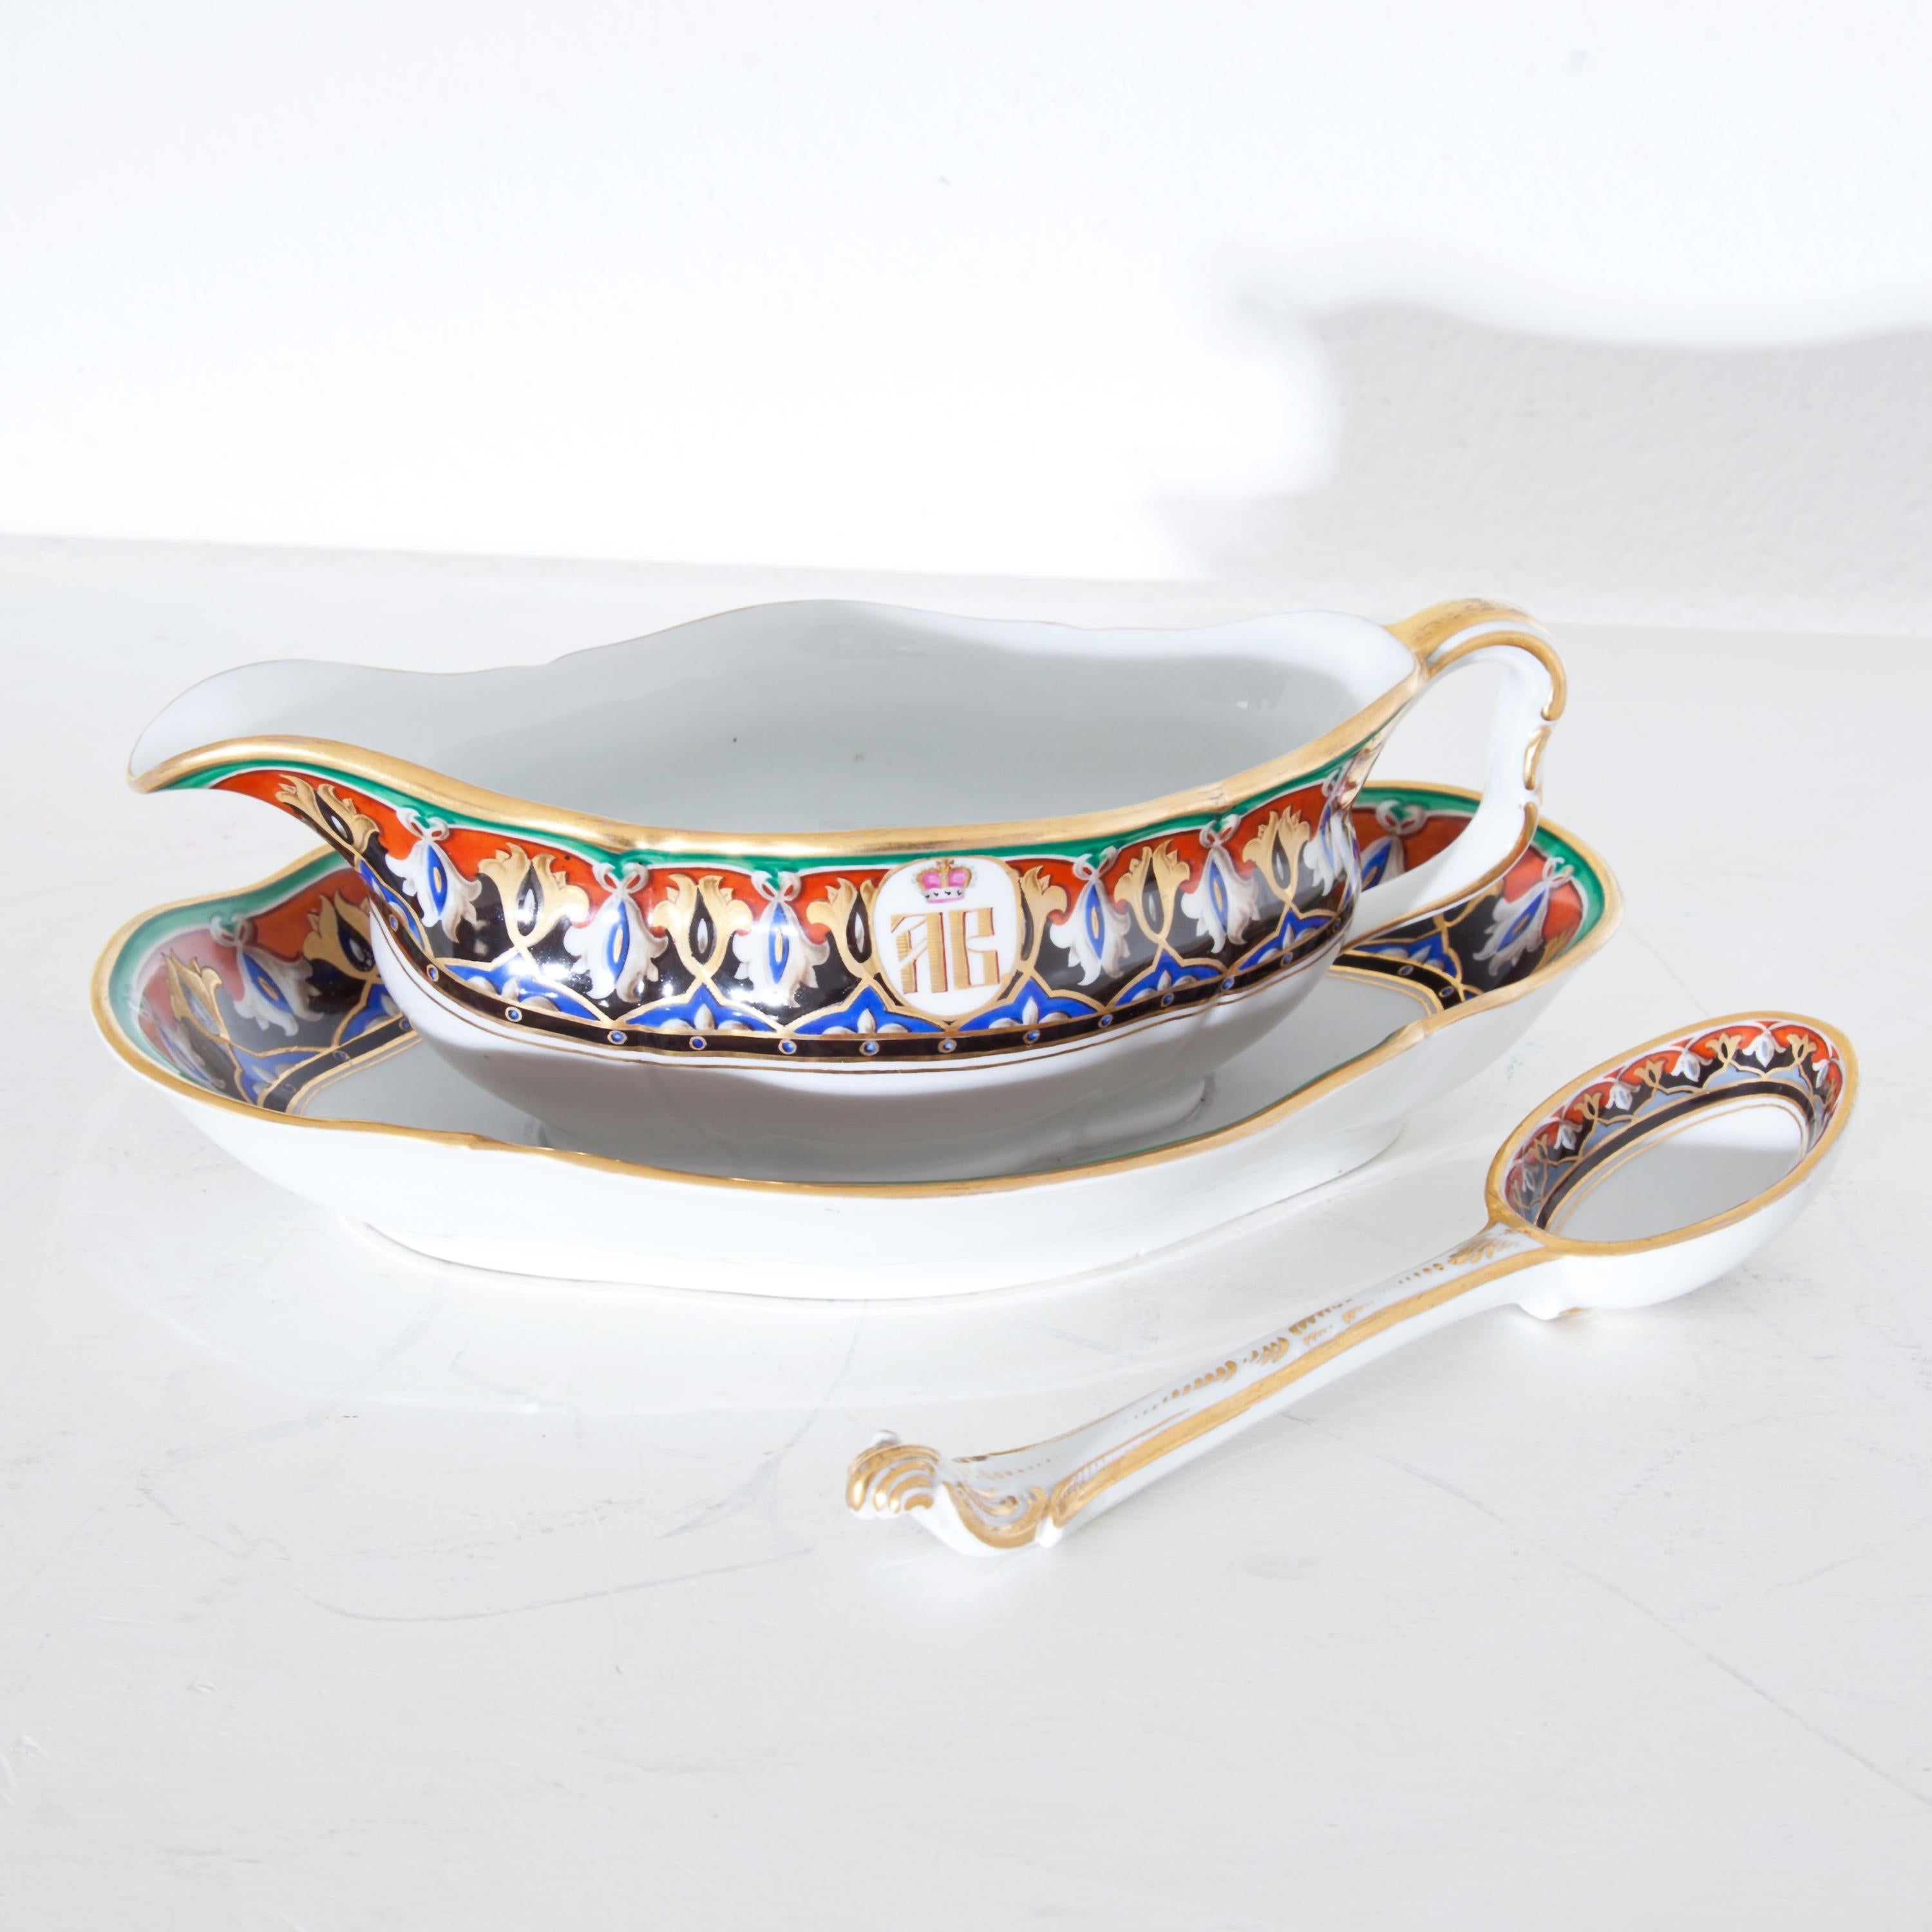 Porcelain Gravy Boat and Spoon with Monogram WA, KPM, Berlin, Germany, 1849-1870 For Sale 7